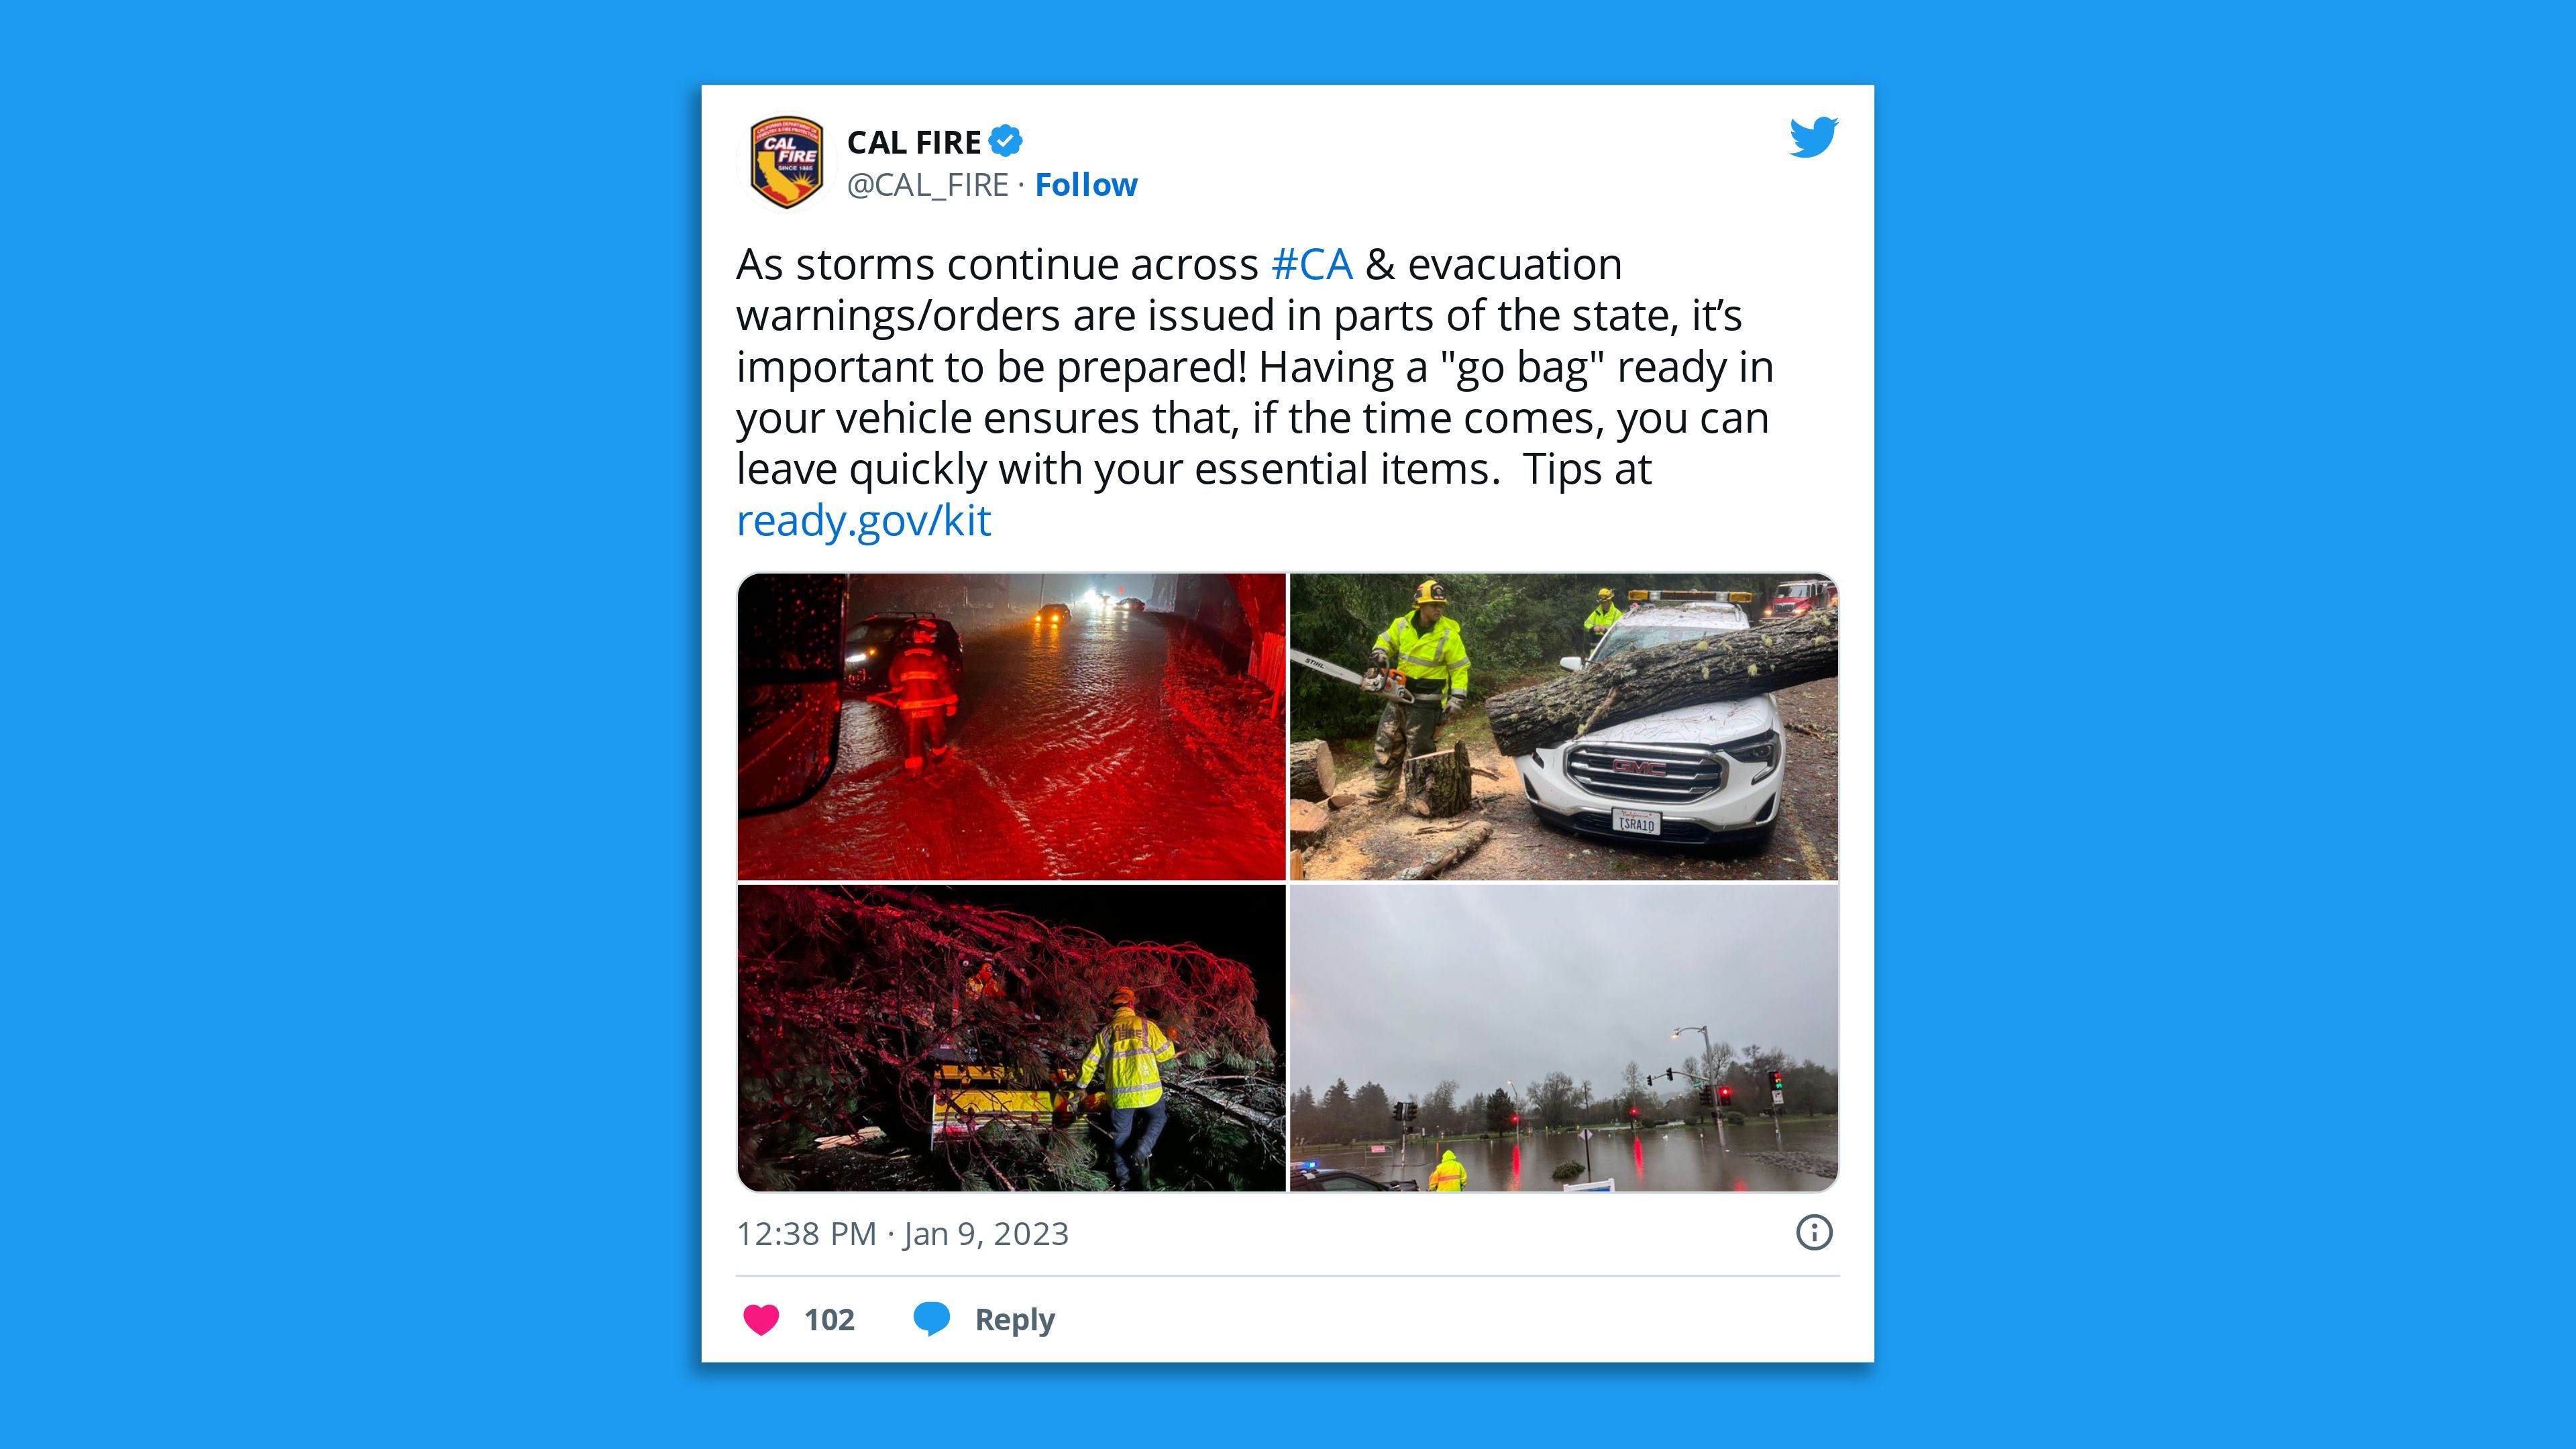 A screenshot of a Cal Fire tweet showing rescues with the comment: "As storms continue across #CA & evacuation warnings/orders are issued in parts of the state, it’s important to be prepared!"